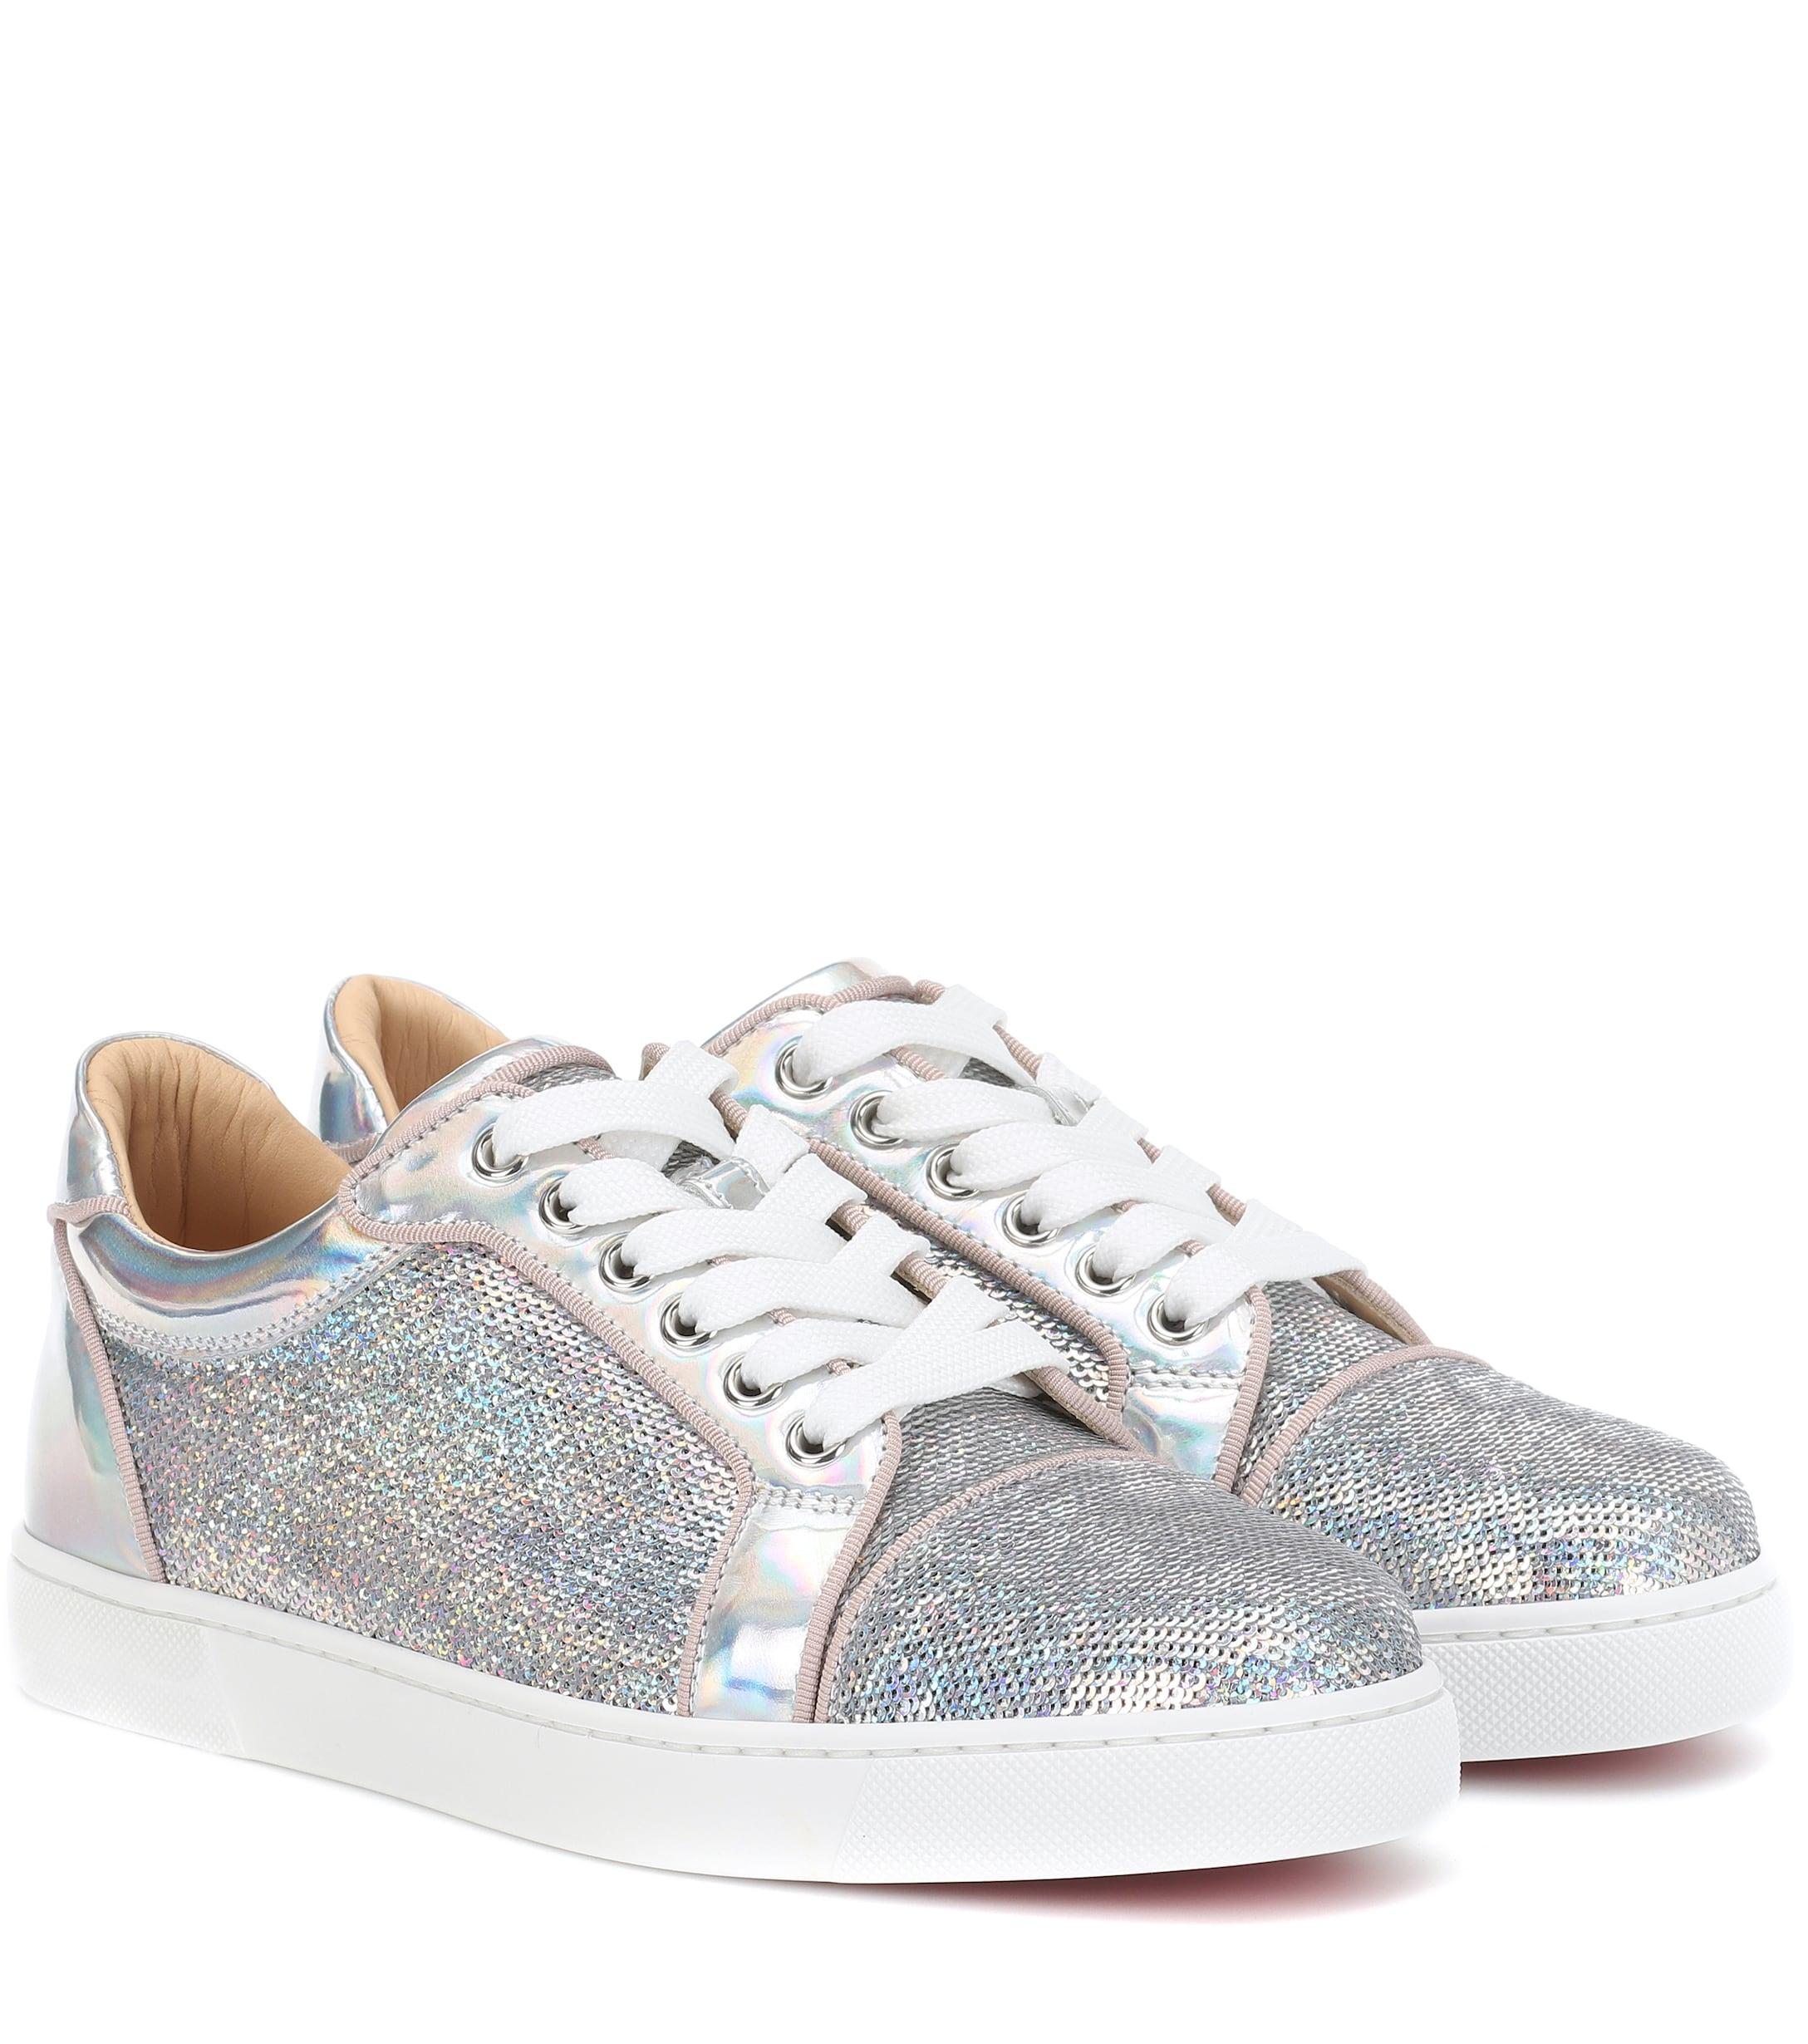 Christian Louboutin Vieira Sequined Sneakers in Metallic | Lyst